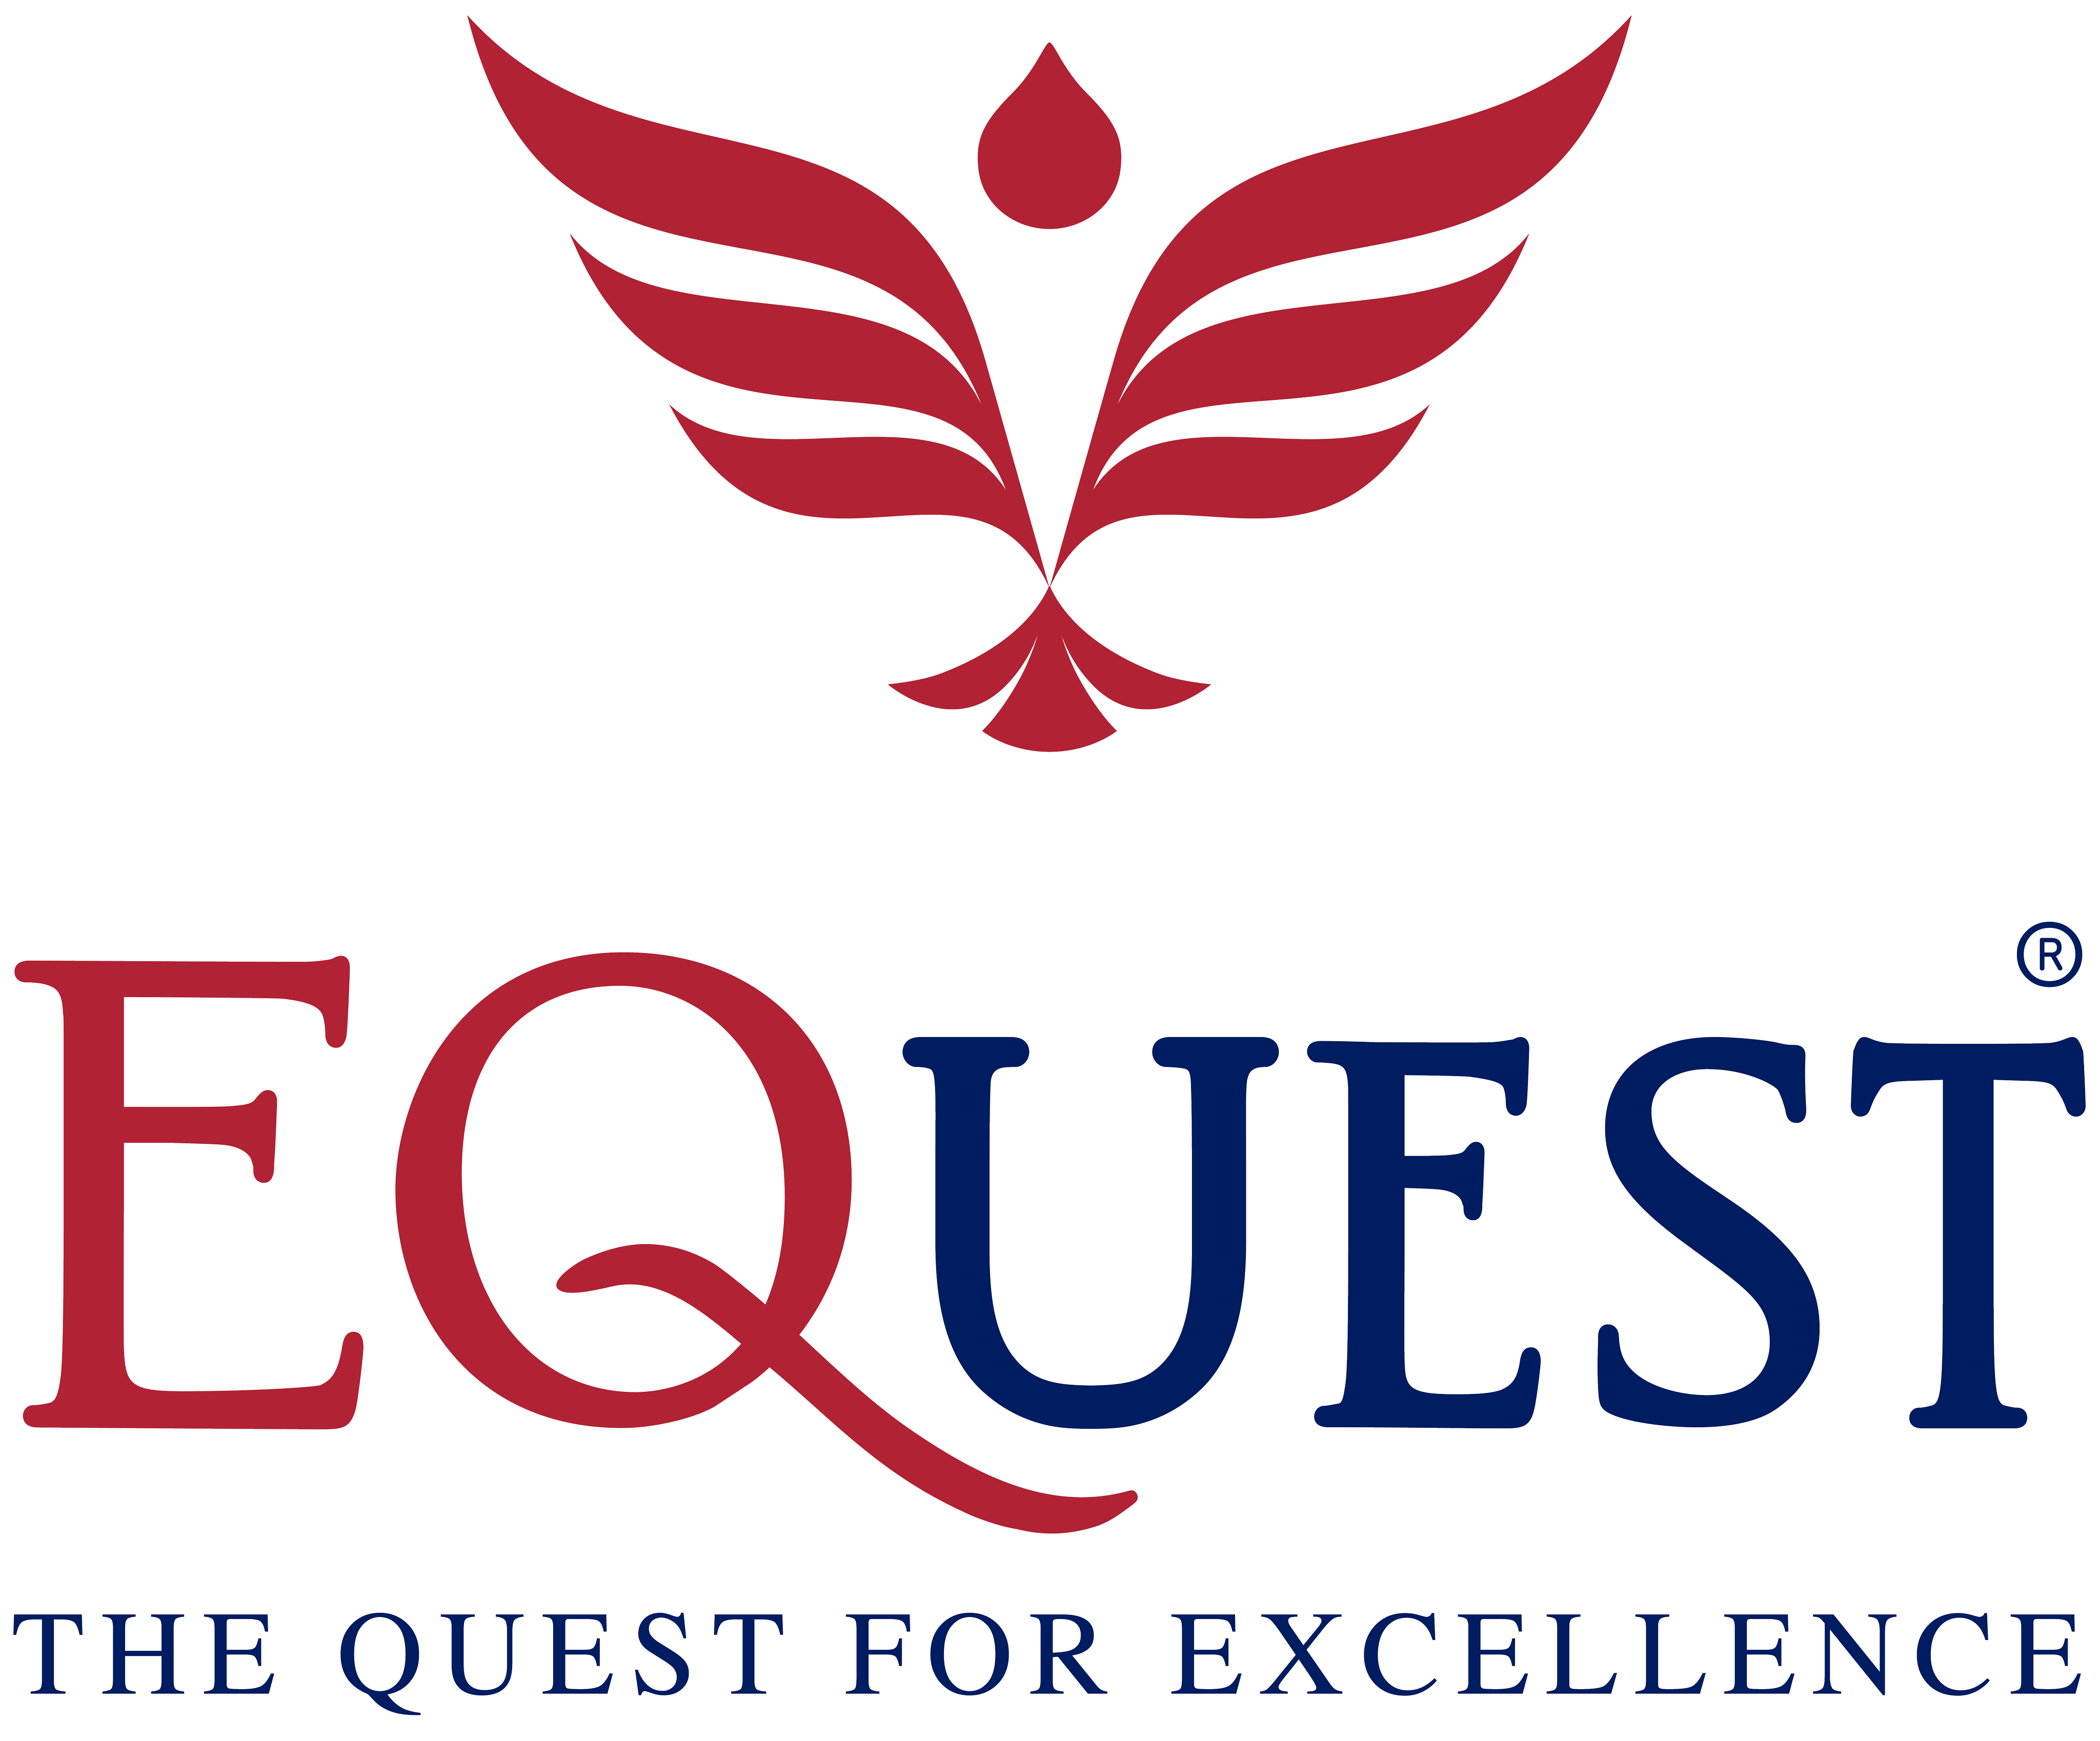 EQuest Education Group (EQG)